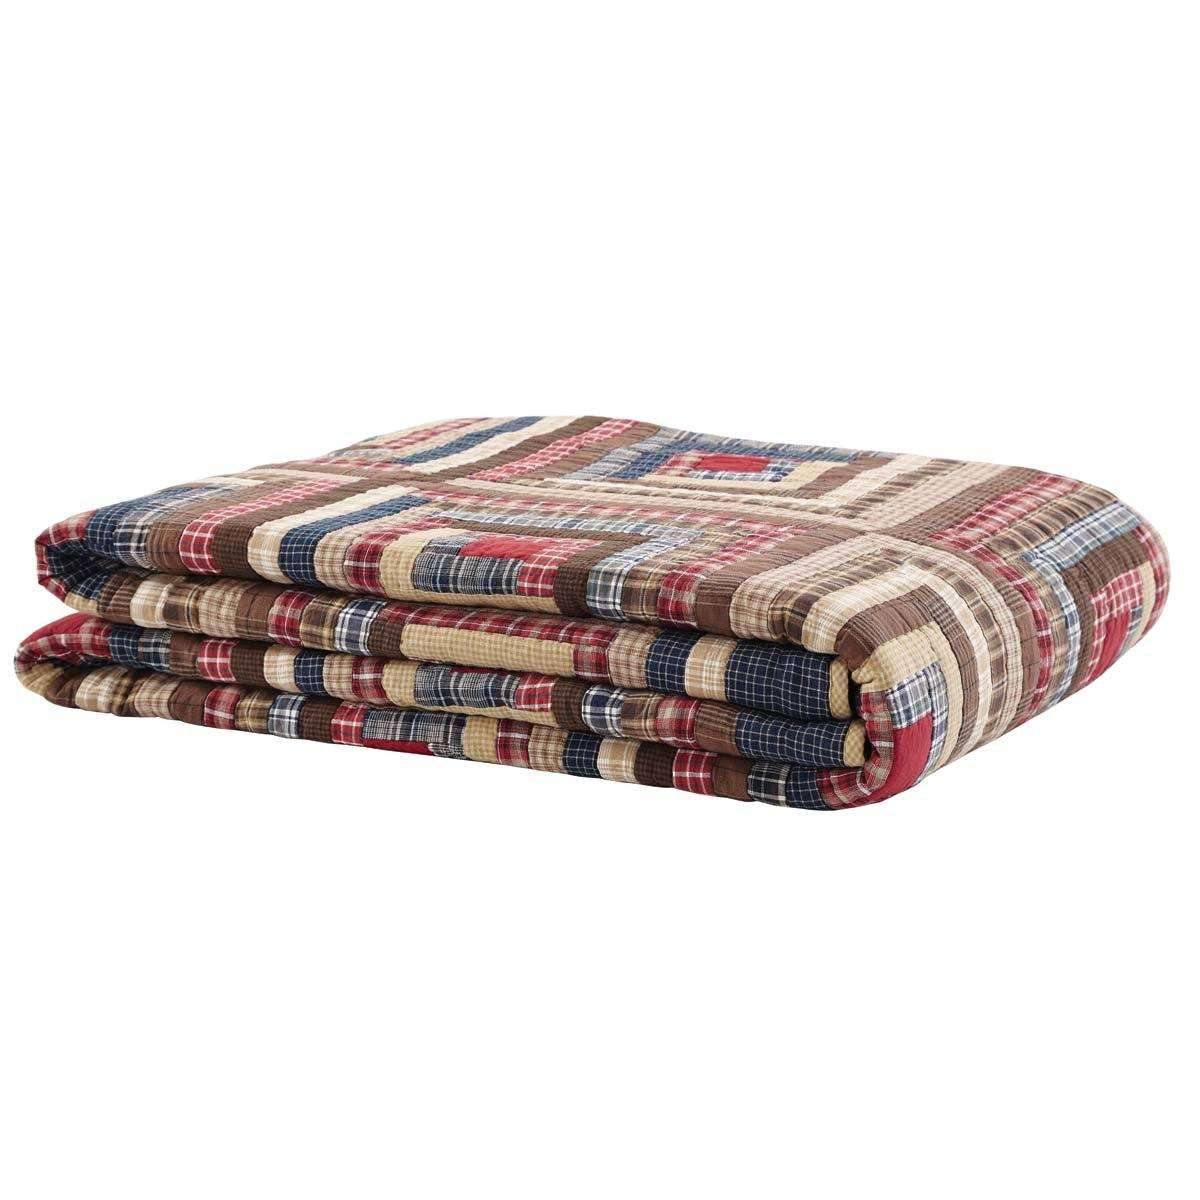 Braxton King Quilt 110Wx97L VHC Brands folded